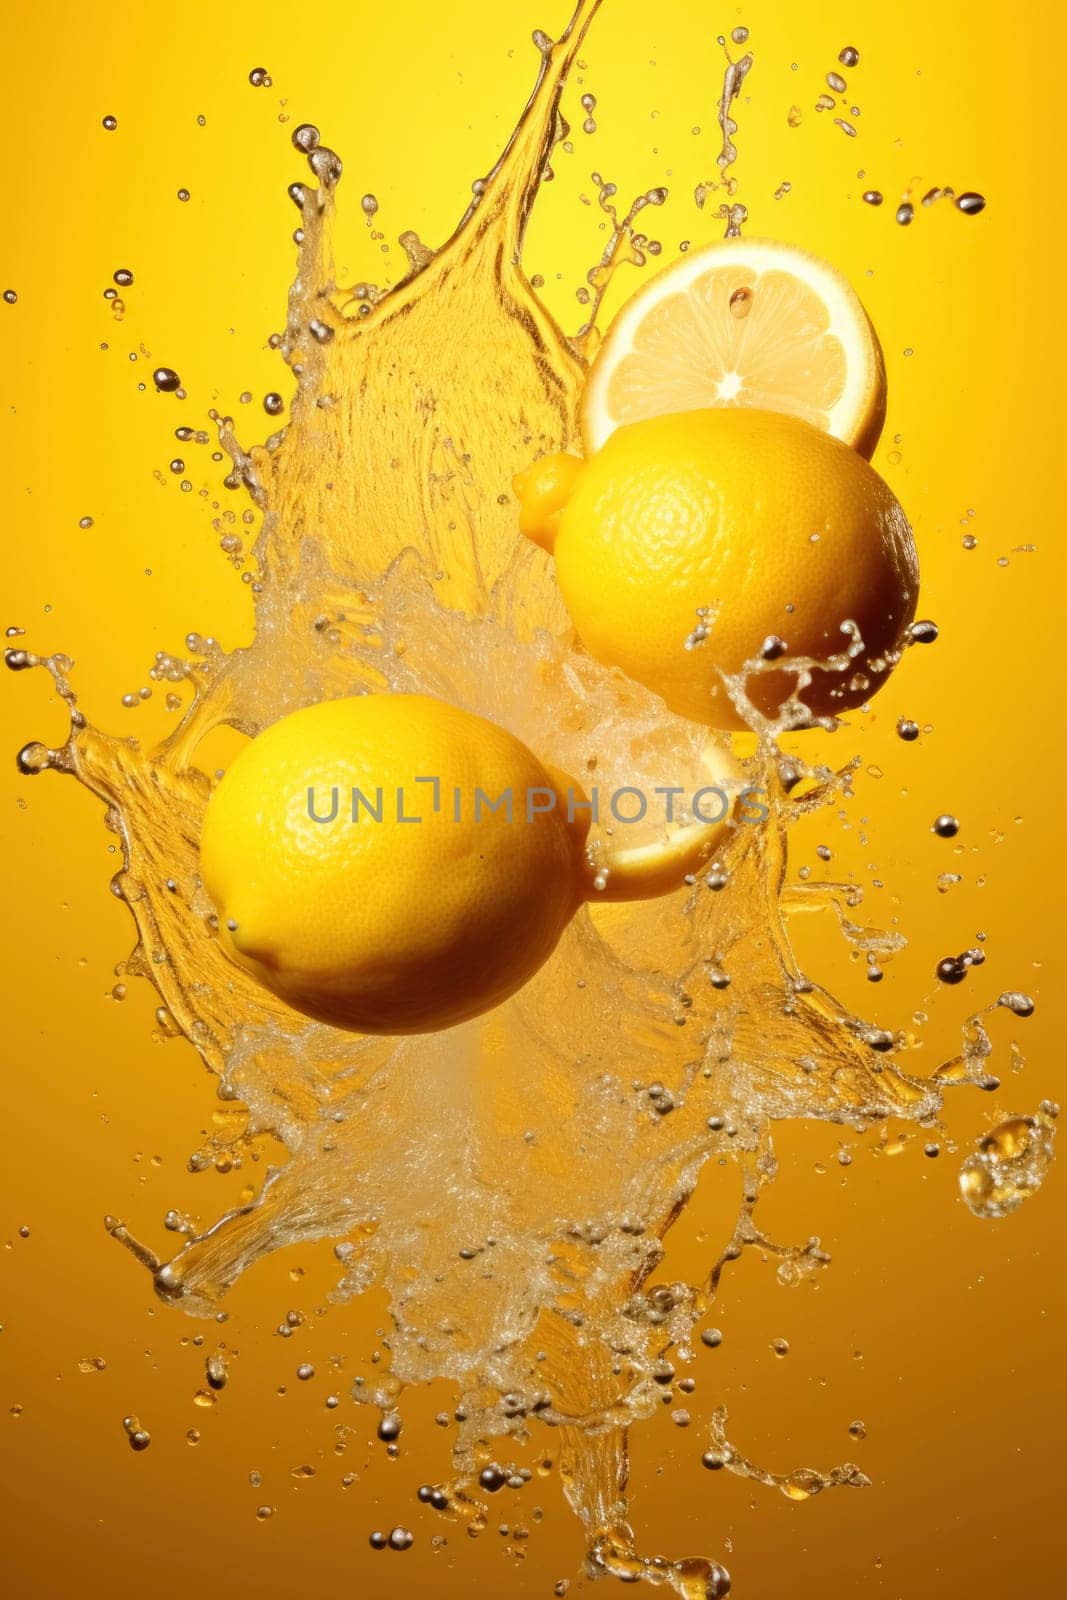 Fresh lemons captured in mid-air with water splashing around them, set against a vibrant yellow background.